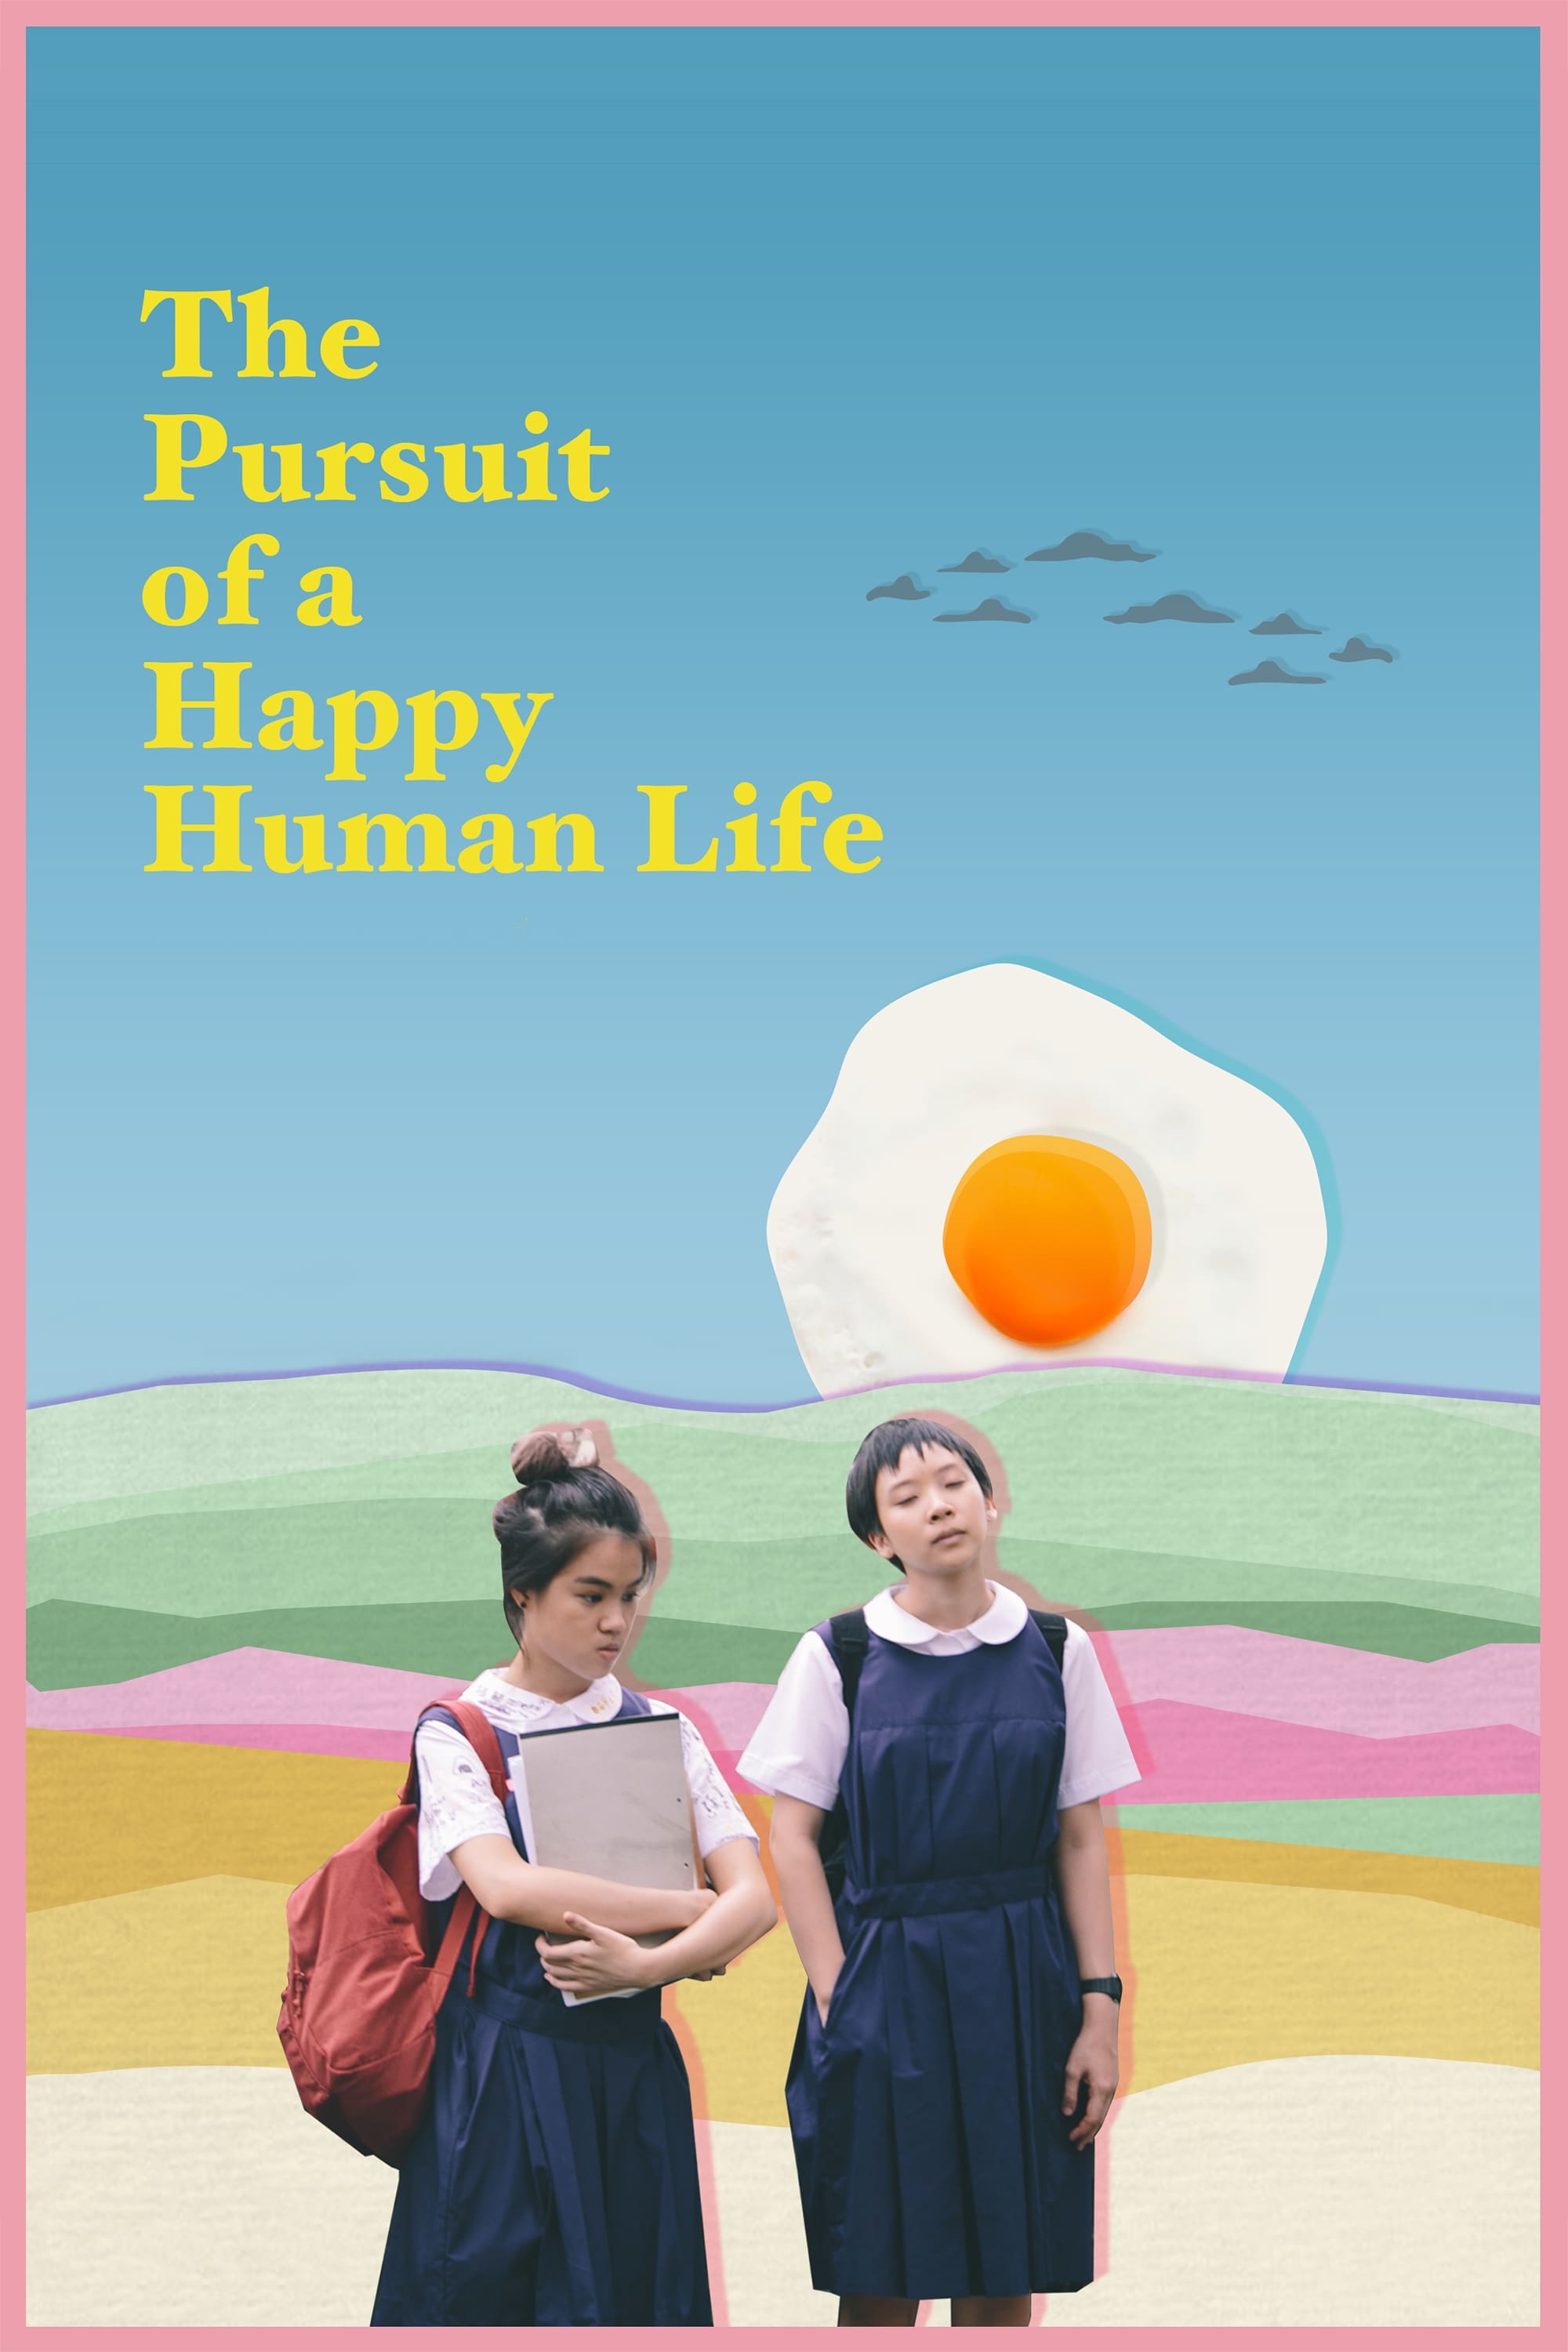 The Pursuit of a Happy Human Life